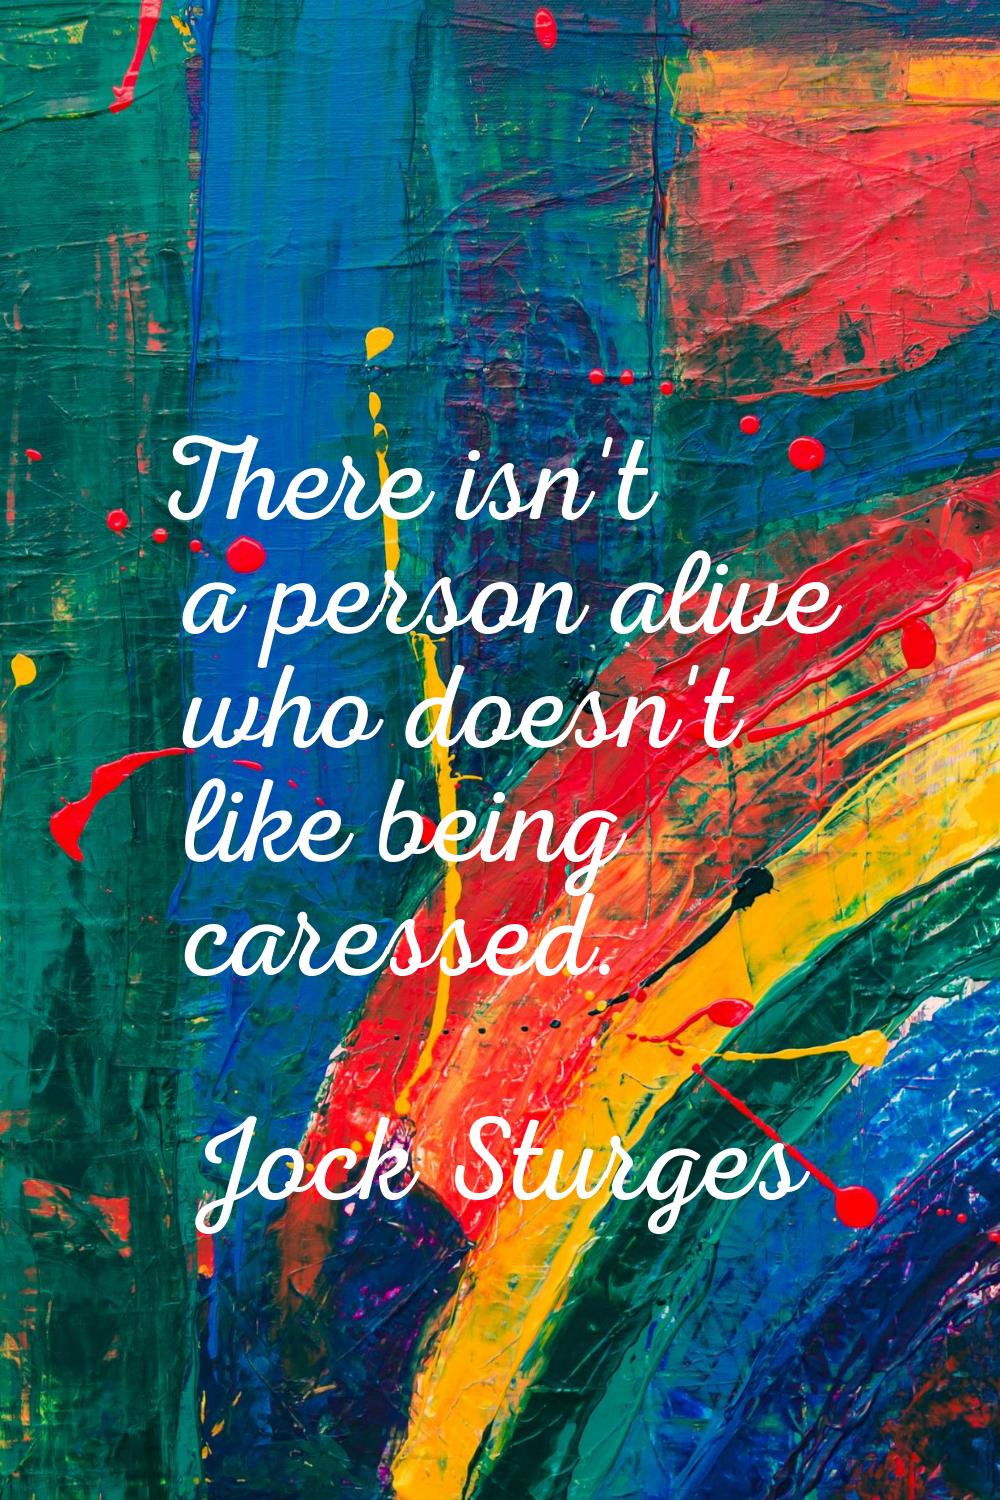 There isn't a person alive who doesn't like being caressed.